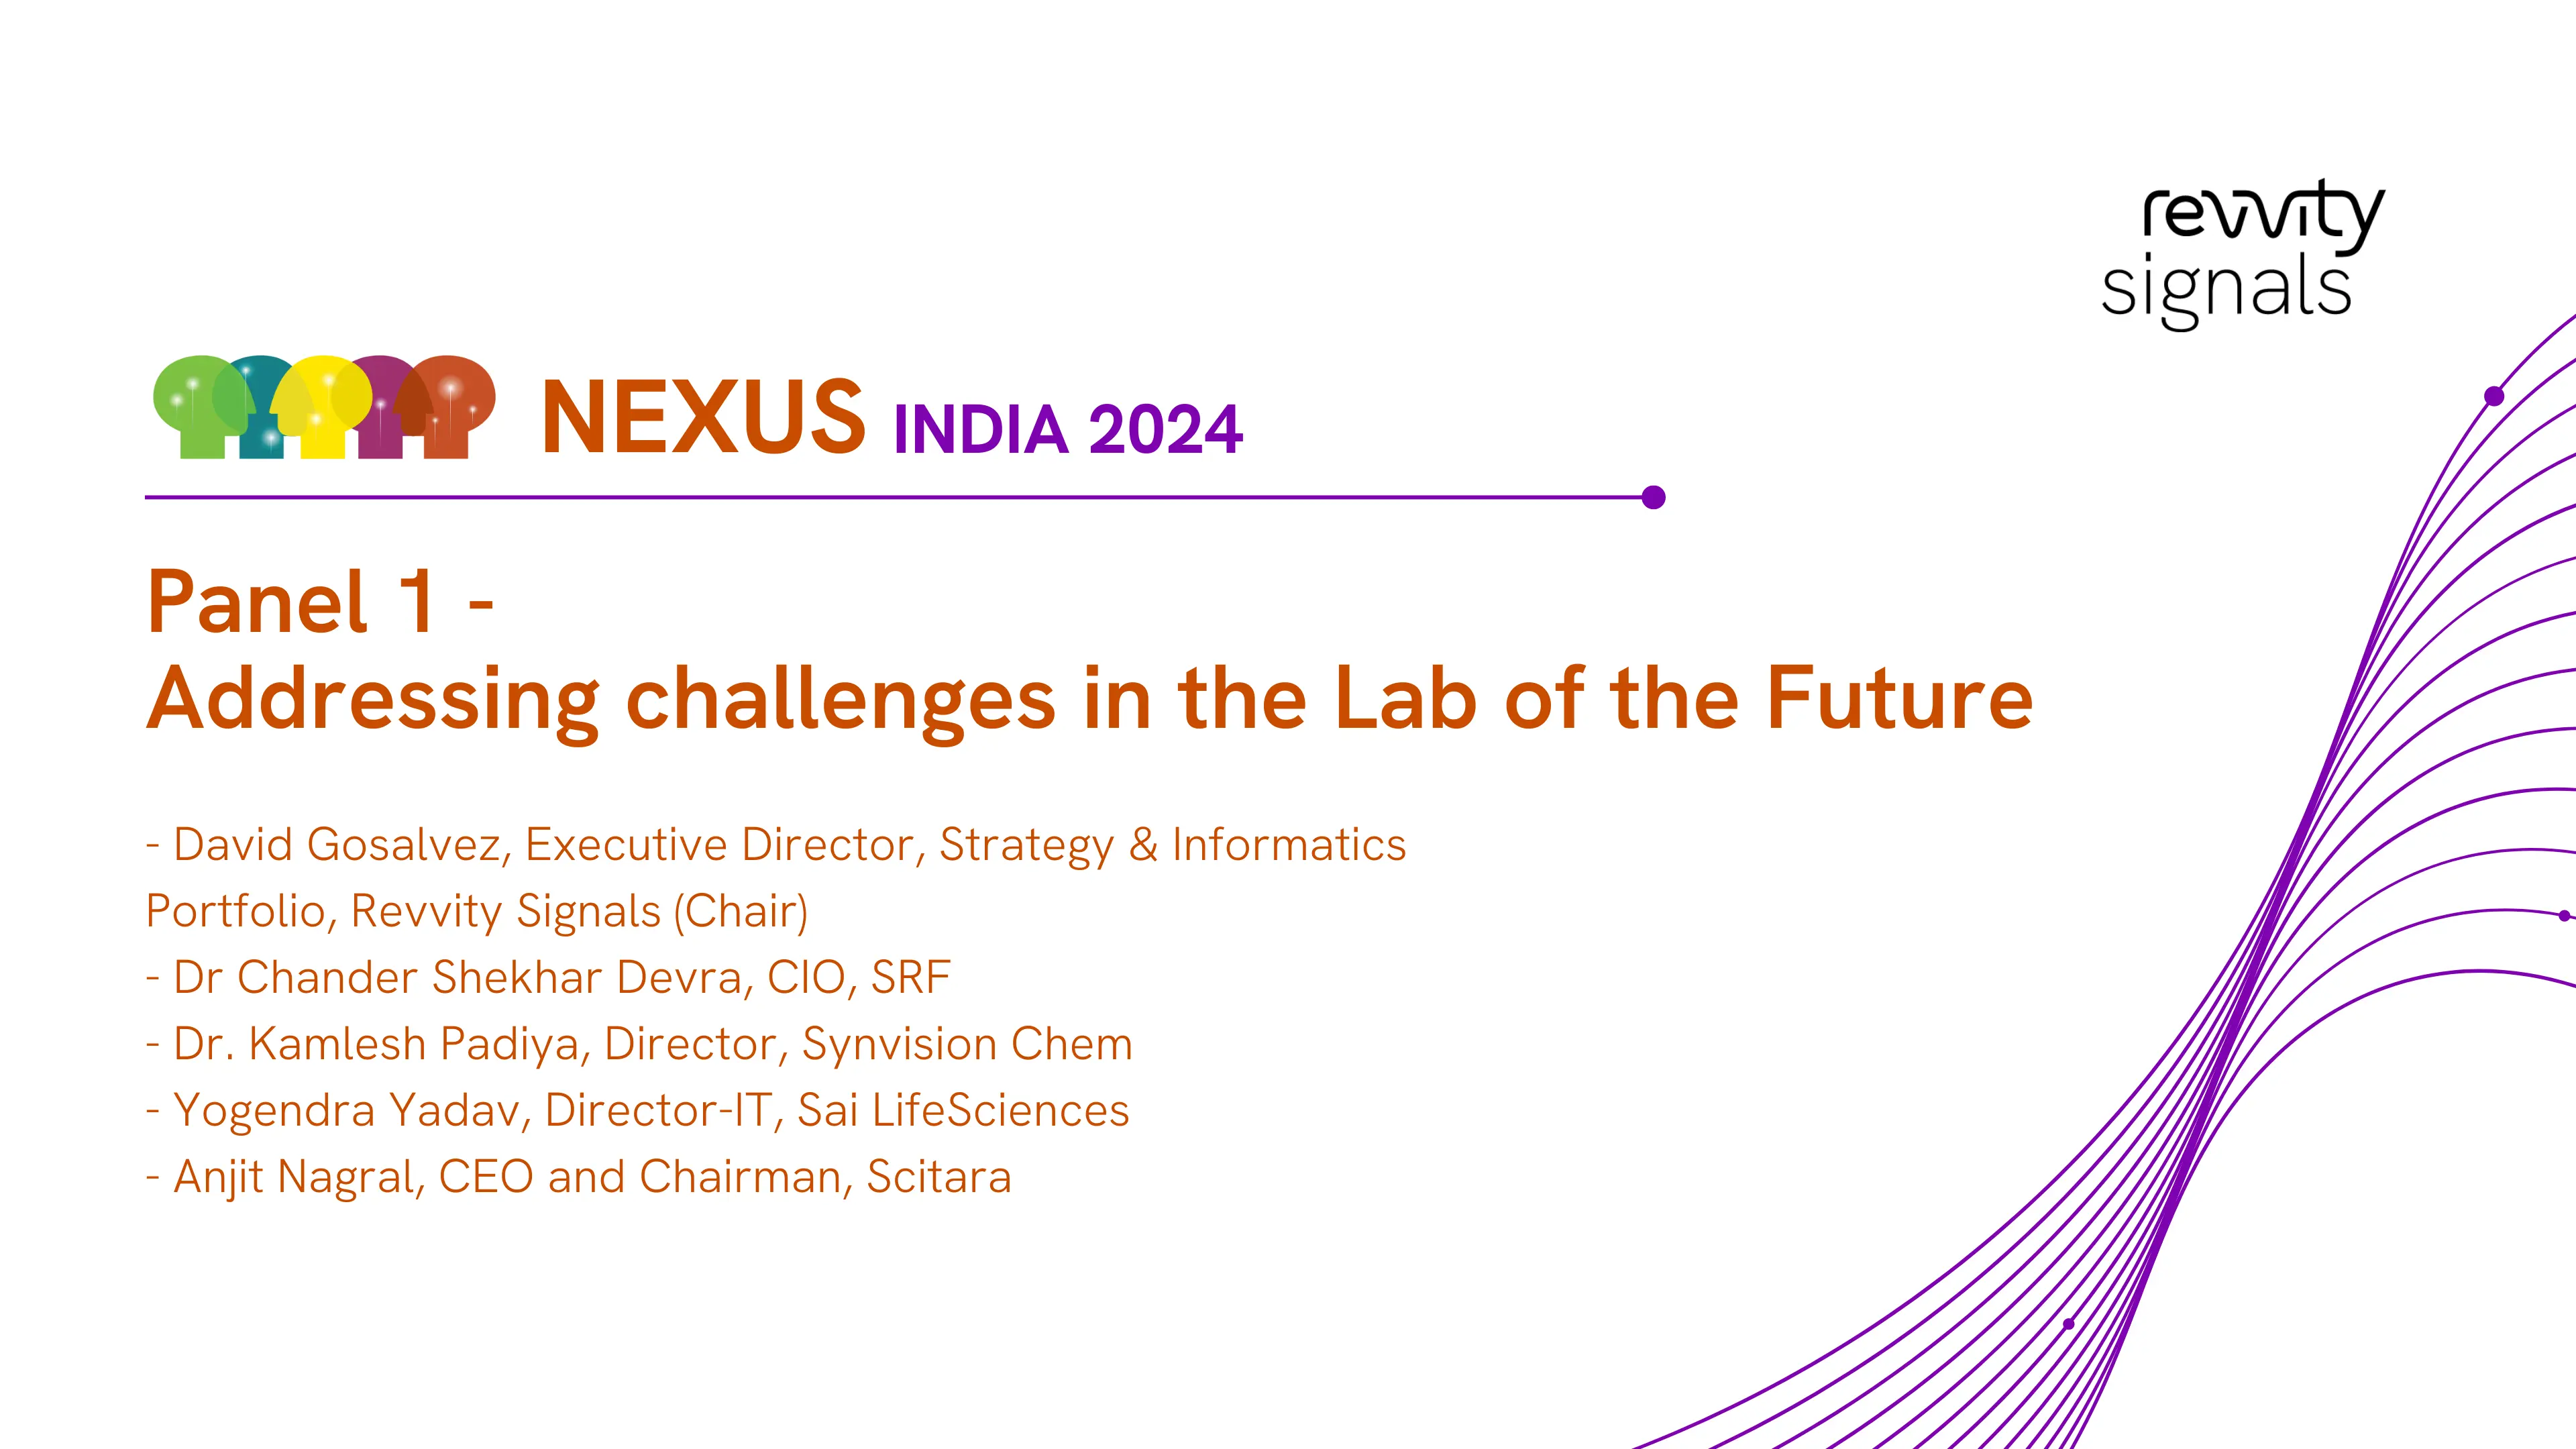 Watch Panel 1 - Addressing challenges in the Lab of the Future on Vimeo.